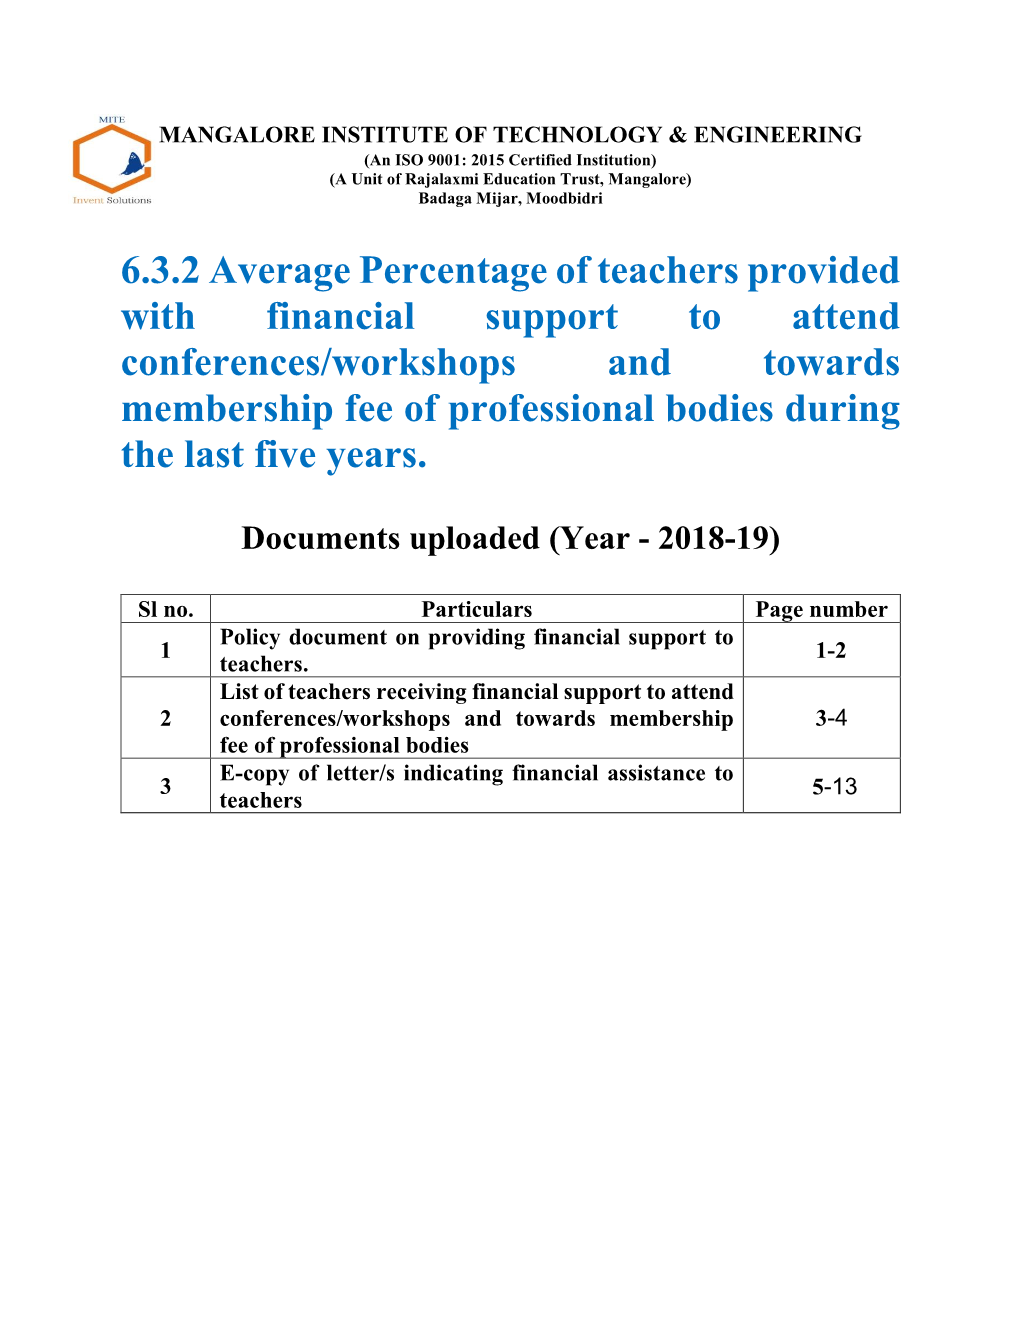 6.3.2 Average Percentage of Teachers Provided with Financial Support To